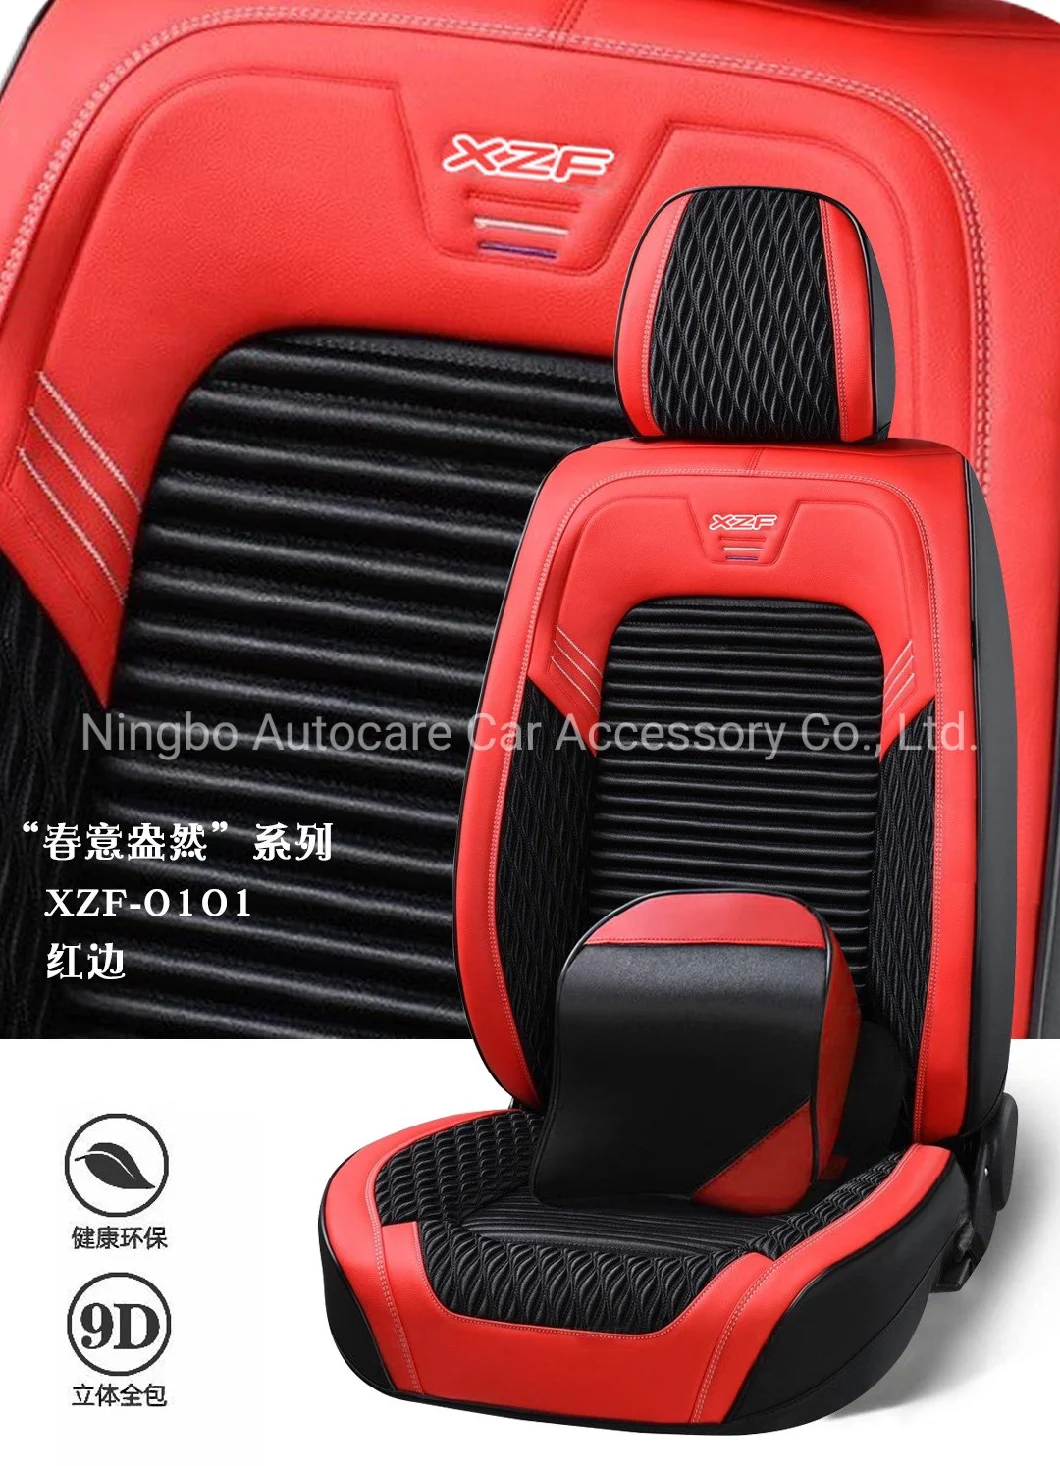 Car Accessories Car Decoration Seat Cushion Universal Leather Auto Car Seat Cover